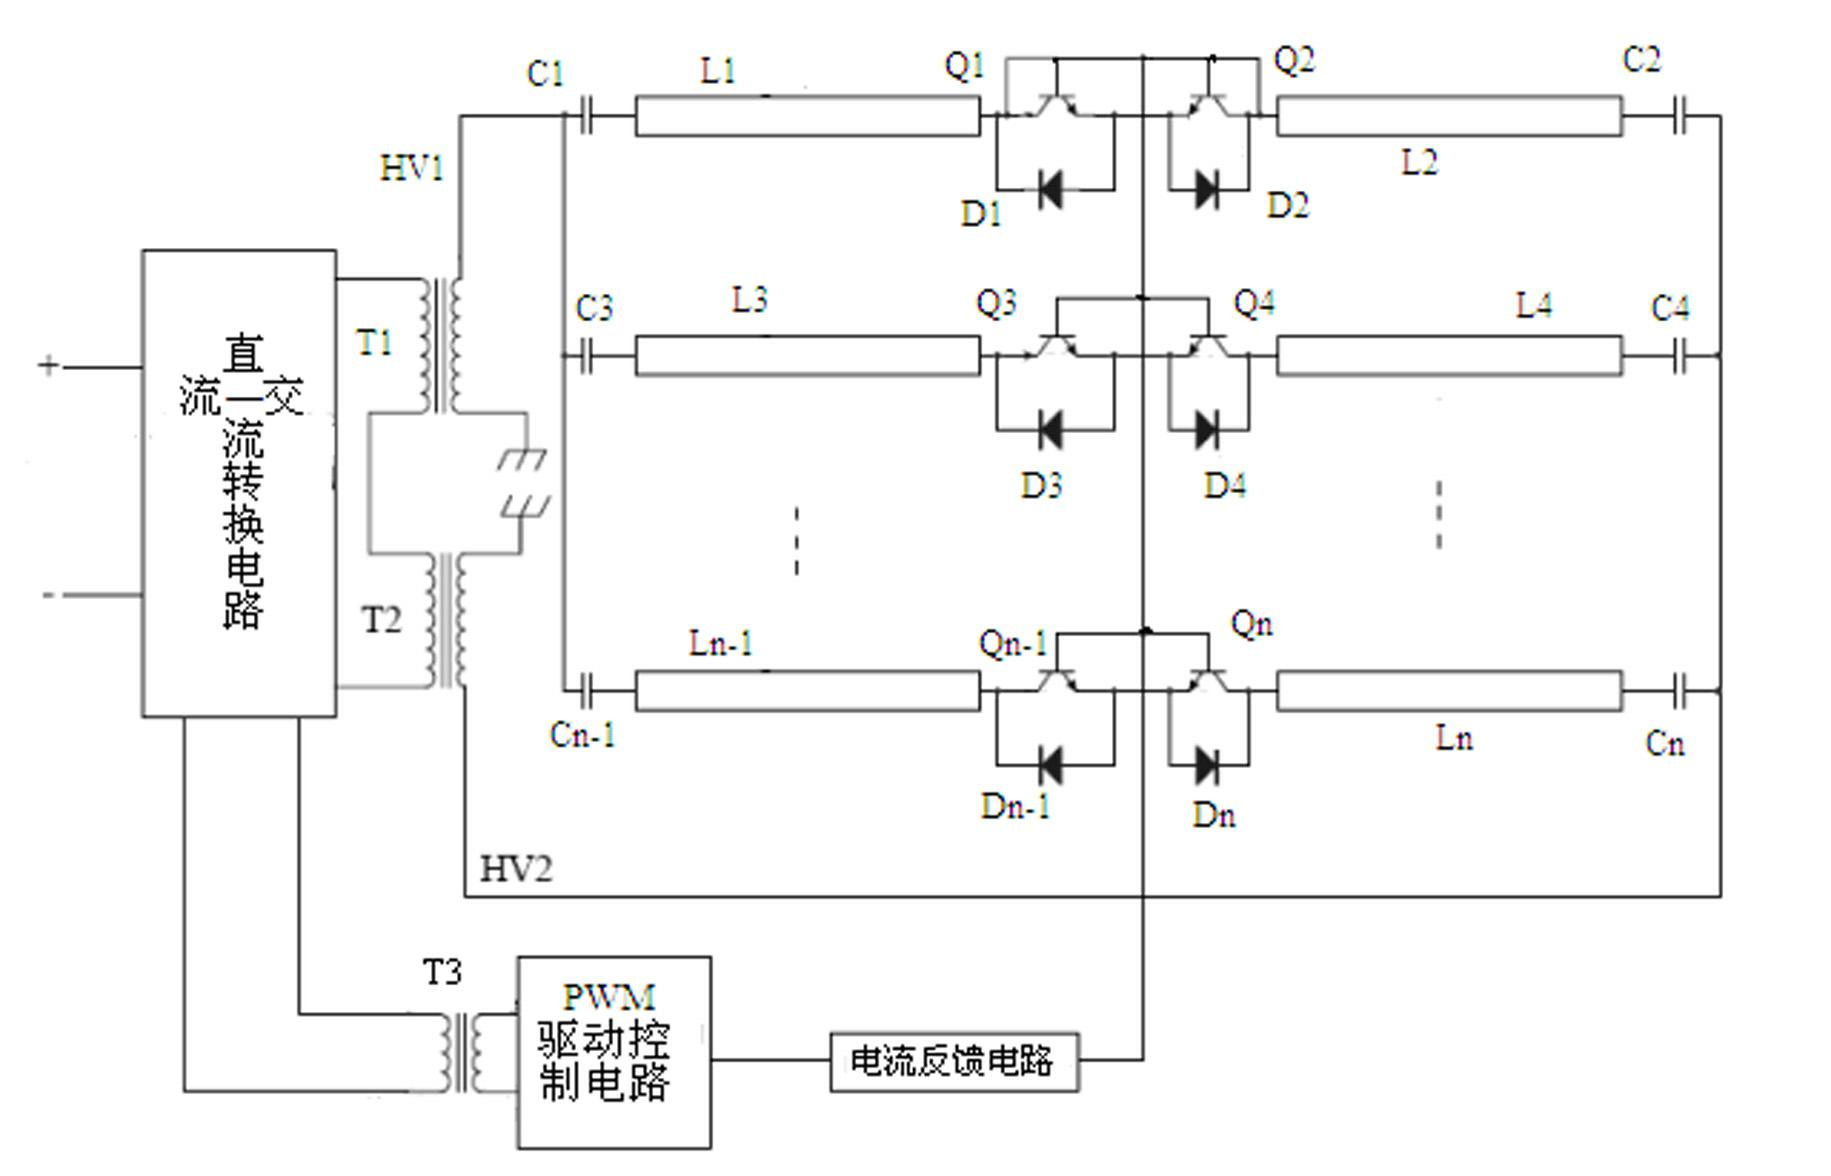 Drive circuit with current balance for CCFL (Cold Cathode Fluorescent Lamp) tubes